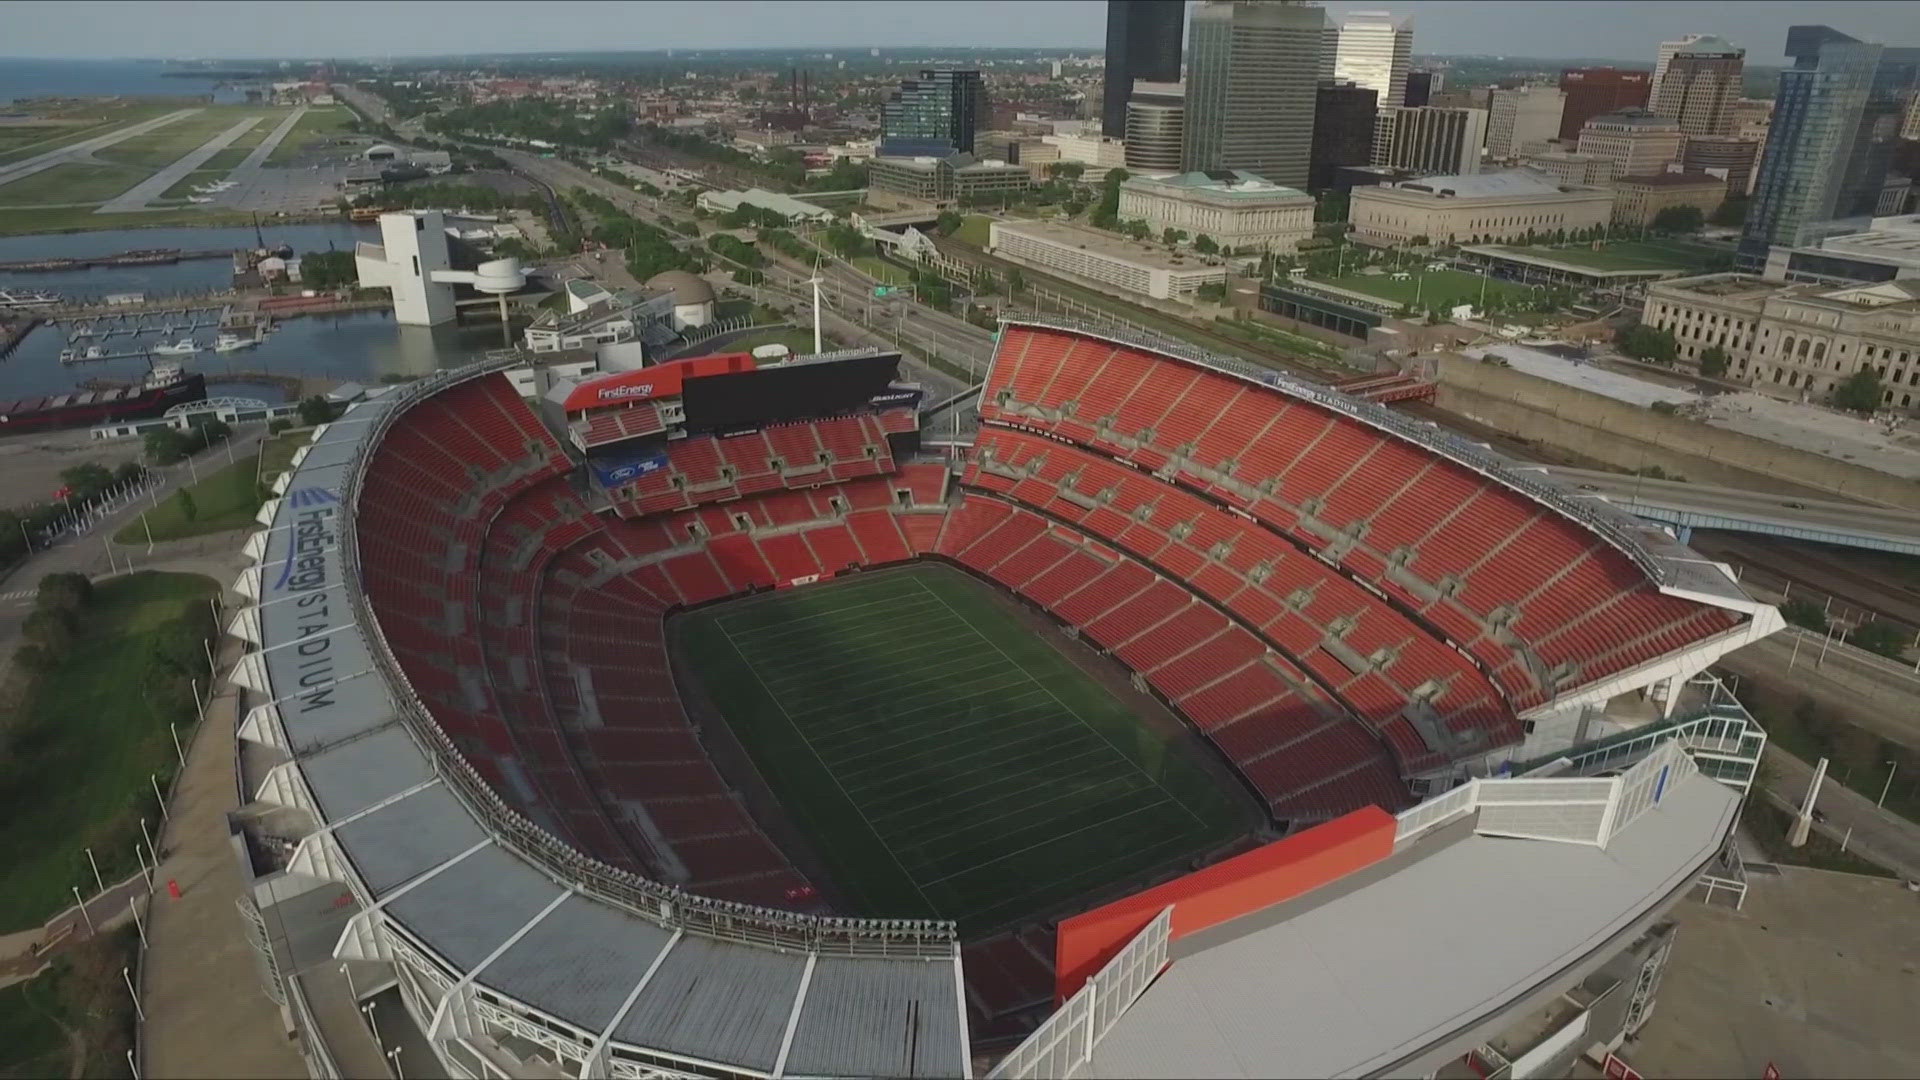 The  Browns owners have optioned 176 acres of land in Brook Park for a potential new stadium.